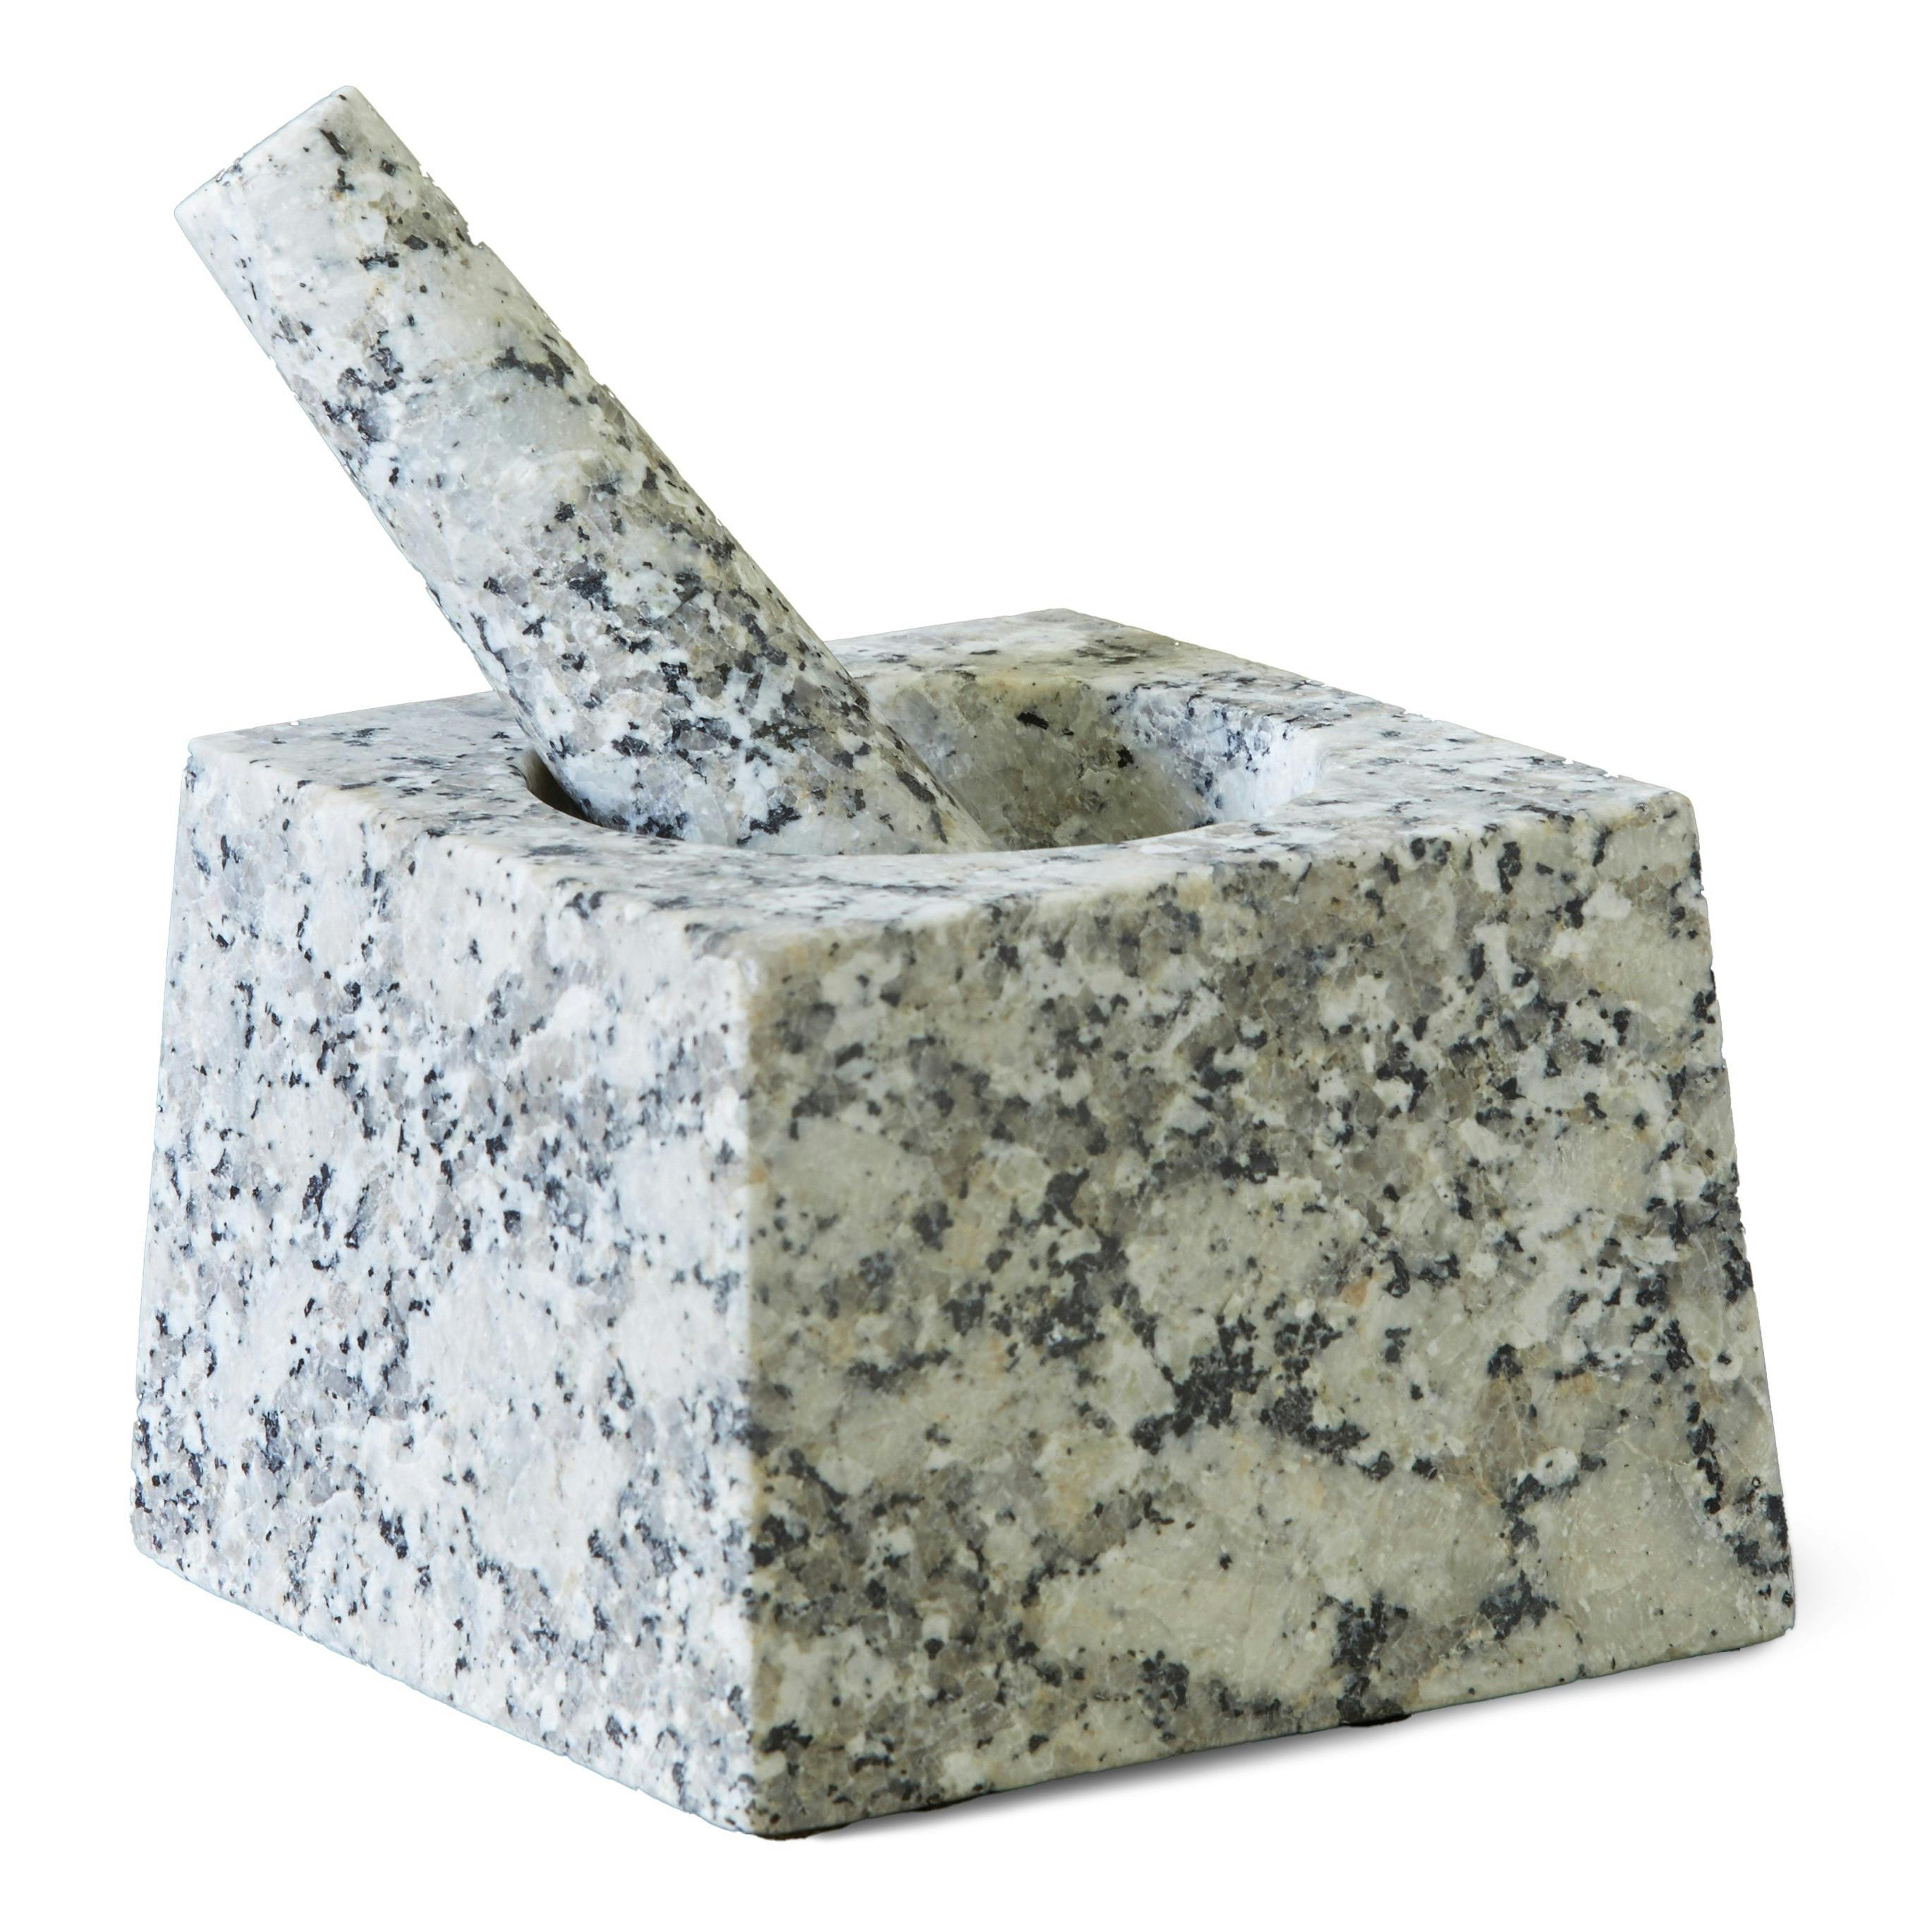 Modern Square Mortar and Pestle